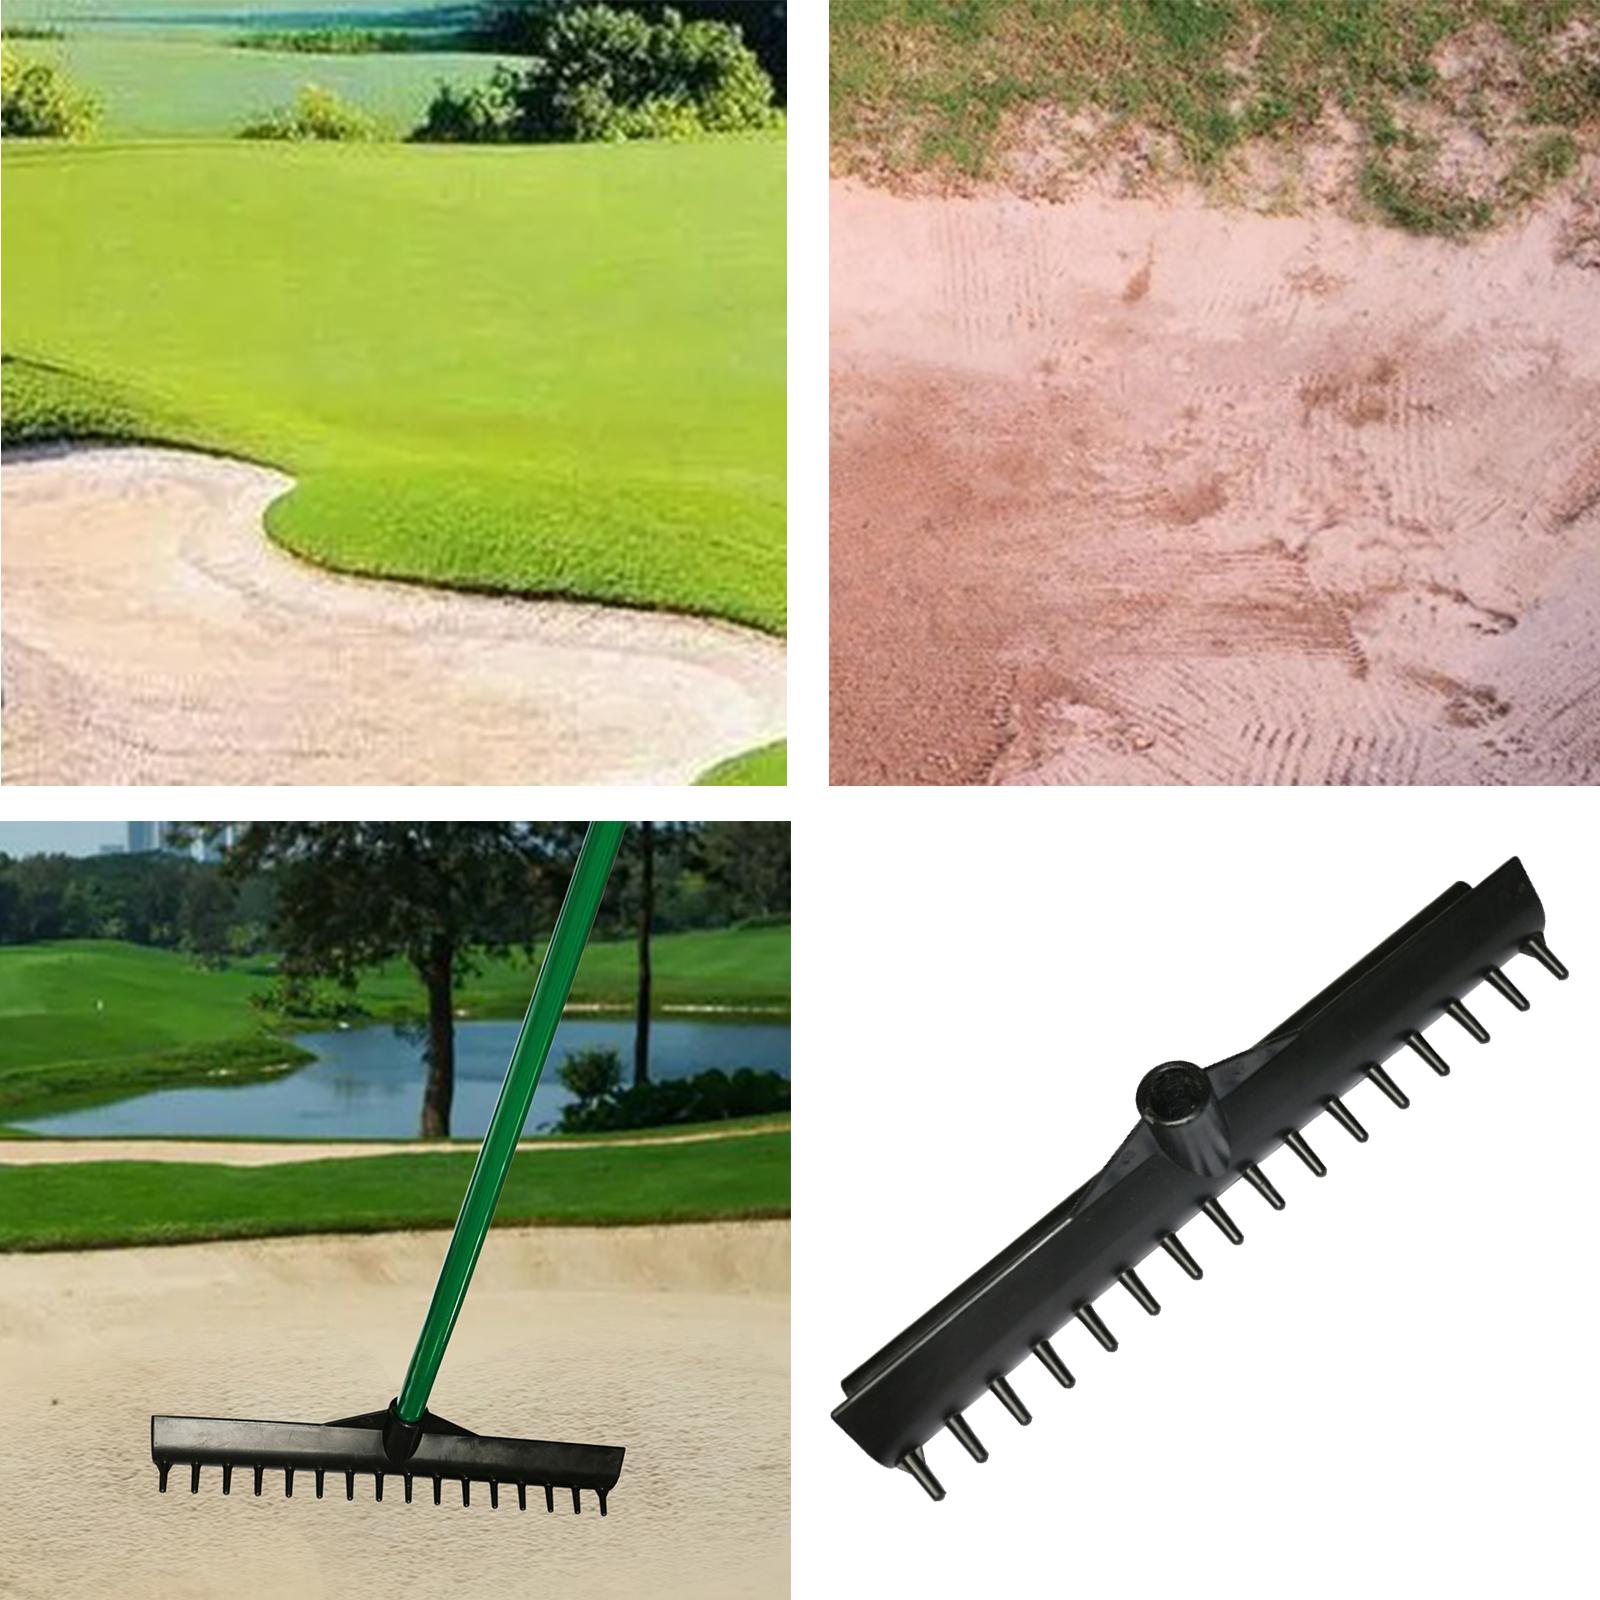 Solid Golf Bunker Rake Head Personal Care Sand Pitch Golf Course Raking Tool